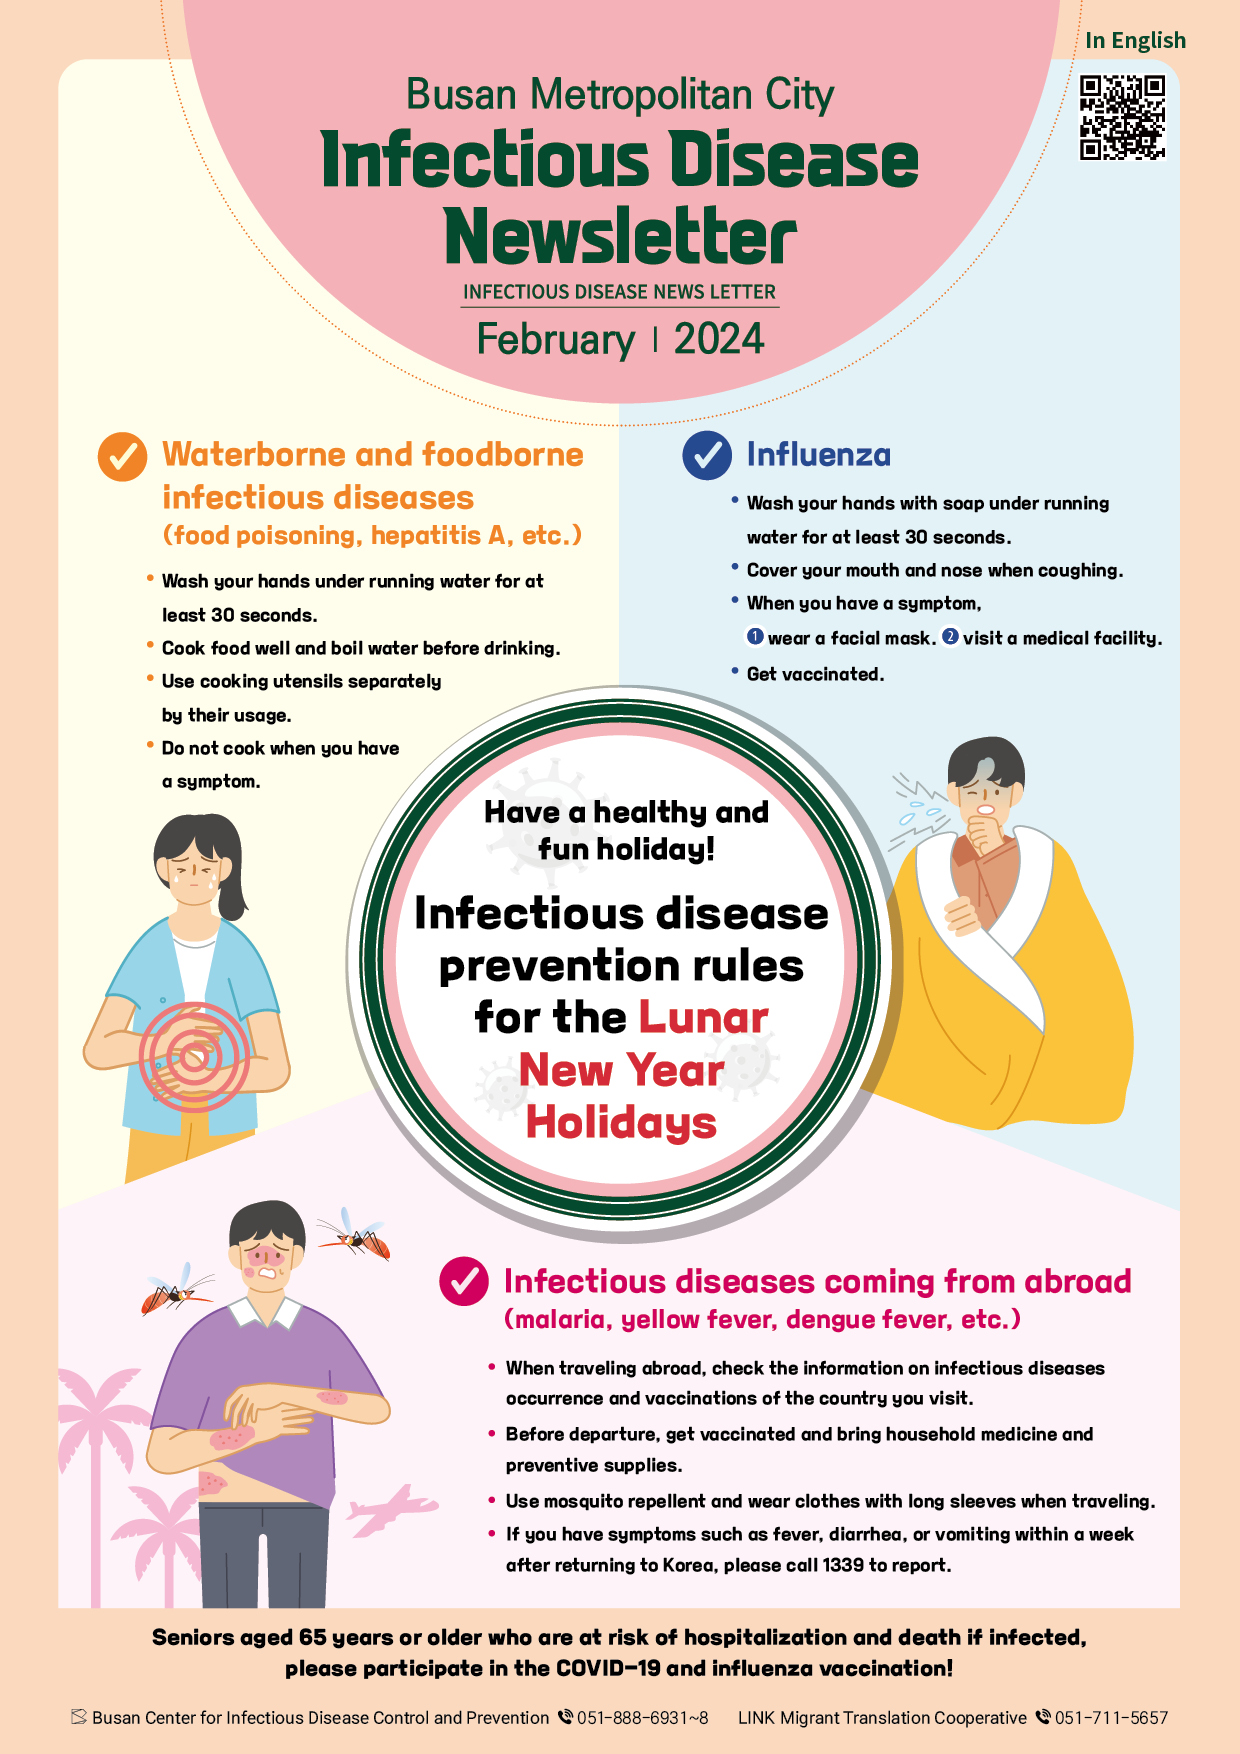 Busan Metropolitan City Infectious Disease Newsletter 
February, 2024
Have a healthy and fun holiday!
Infectious disease prevention rules for the
Lunar New Year Holidays
Waterborne and foodborne infectious diseases
(food poisoning, hepatitis A, etc.)
- Wash your hands under running water for at least 30 seconds.
- Cook food well and boil water before drinking.
- Use cooking utensils separately by their usage.
- Do not cook when you have a symptom.
Influenza
- Wash your hands with soap under running water for at least 30 seconds.
- Cover your mouth and nose when coughing.
- When you have a symptom,
1) wear a facial mas. 2) visit a medical facility.
- Get vaccinated.
Infectious diseases coming from abroad (malaria, yellow fever, dengue fever, etc.)
- When traveling abroad, check the information on infectious diseases occurrence and vaccinations of the country you visit.
- Before departure, get vaccinated and bring household medicine and preventive supplies.
- Use mosquito repellent and wear clothes with long sleeves when traveling.
- If you have symptoms such as fever, diarrhea, or vomiting within a week after returning to Korea, please call 1339 to report.
Seniors aged 65 years or older who are at risk of hospitalization and death if infected, 
please participate in the COVID-19 and influenza vaccination! 
Infectious Disease Management Support Team 051-888-6931~8
LINK Migrant Translation Cooperative 051-711-5657 사진0